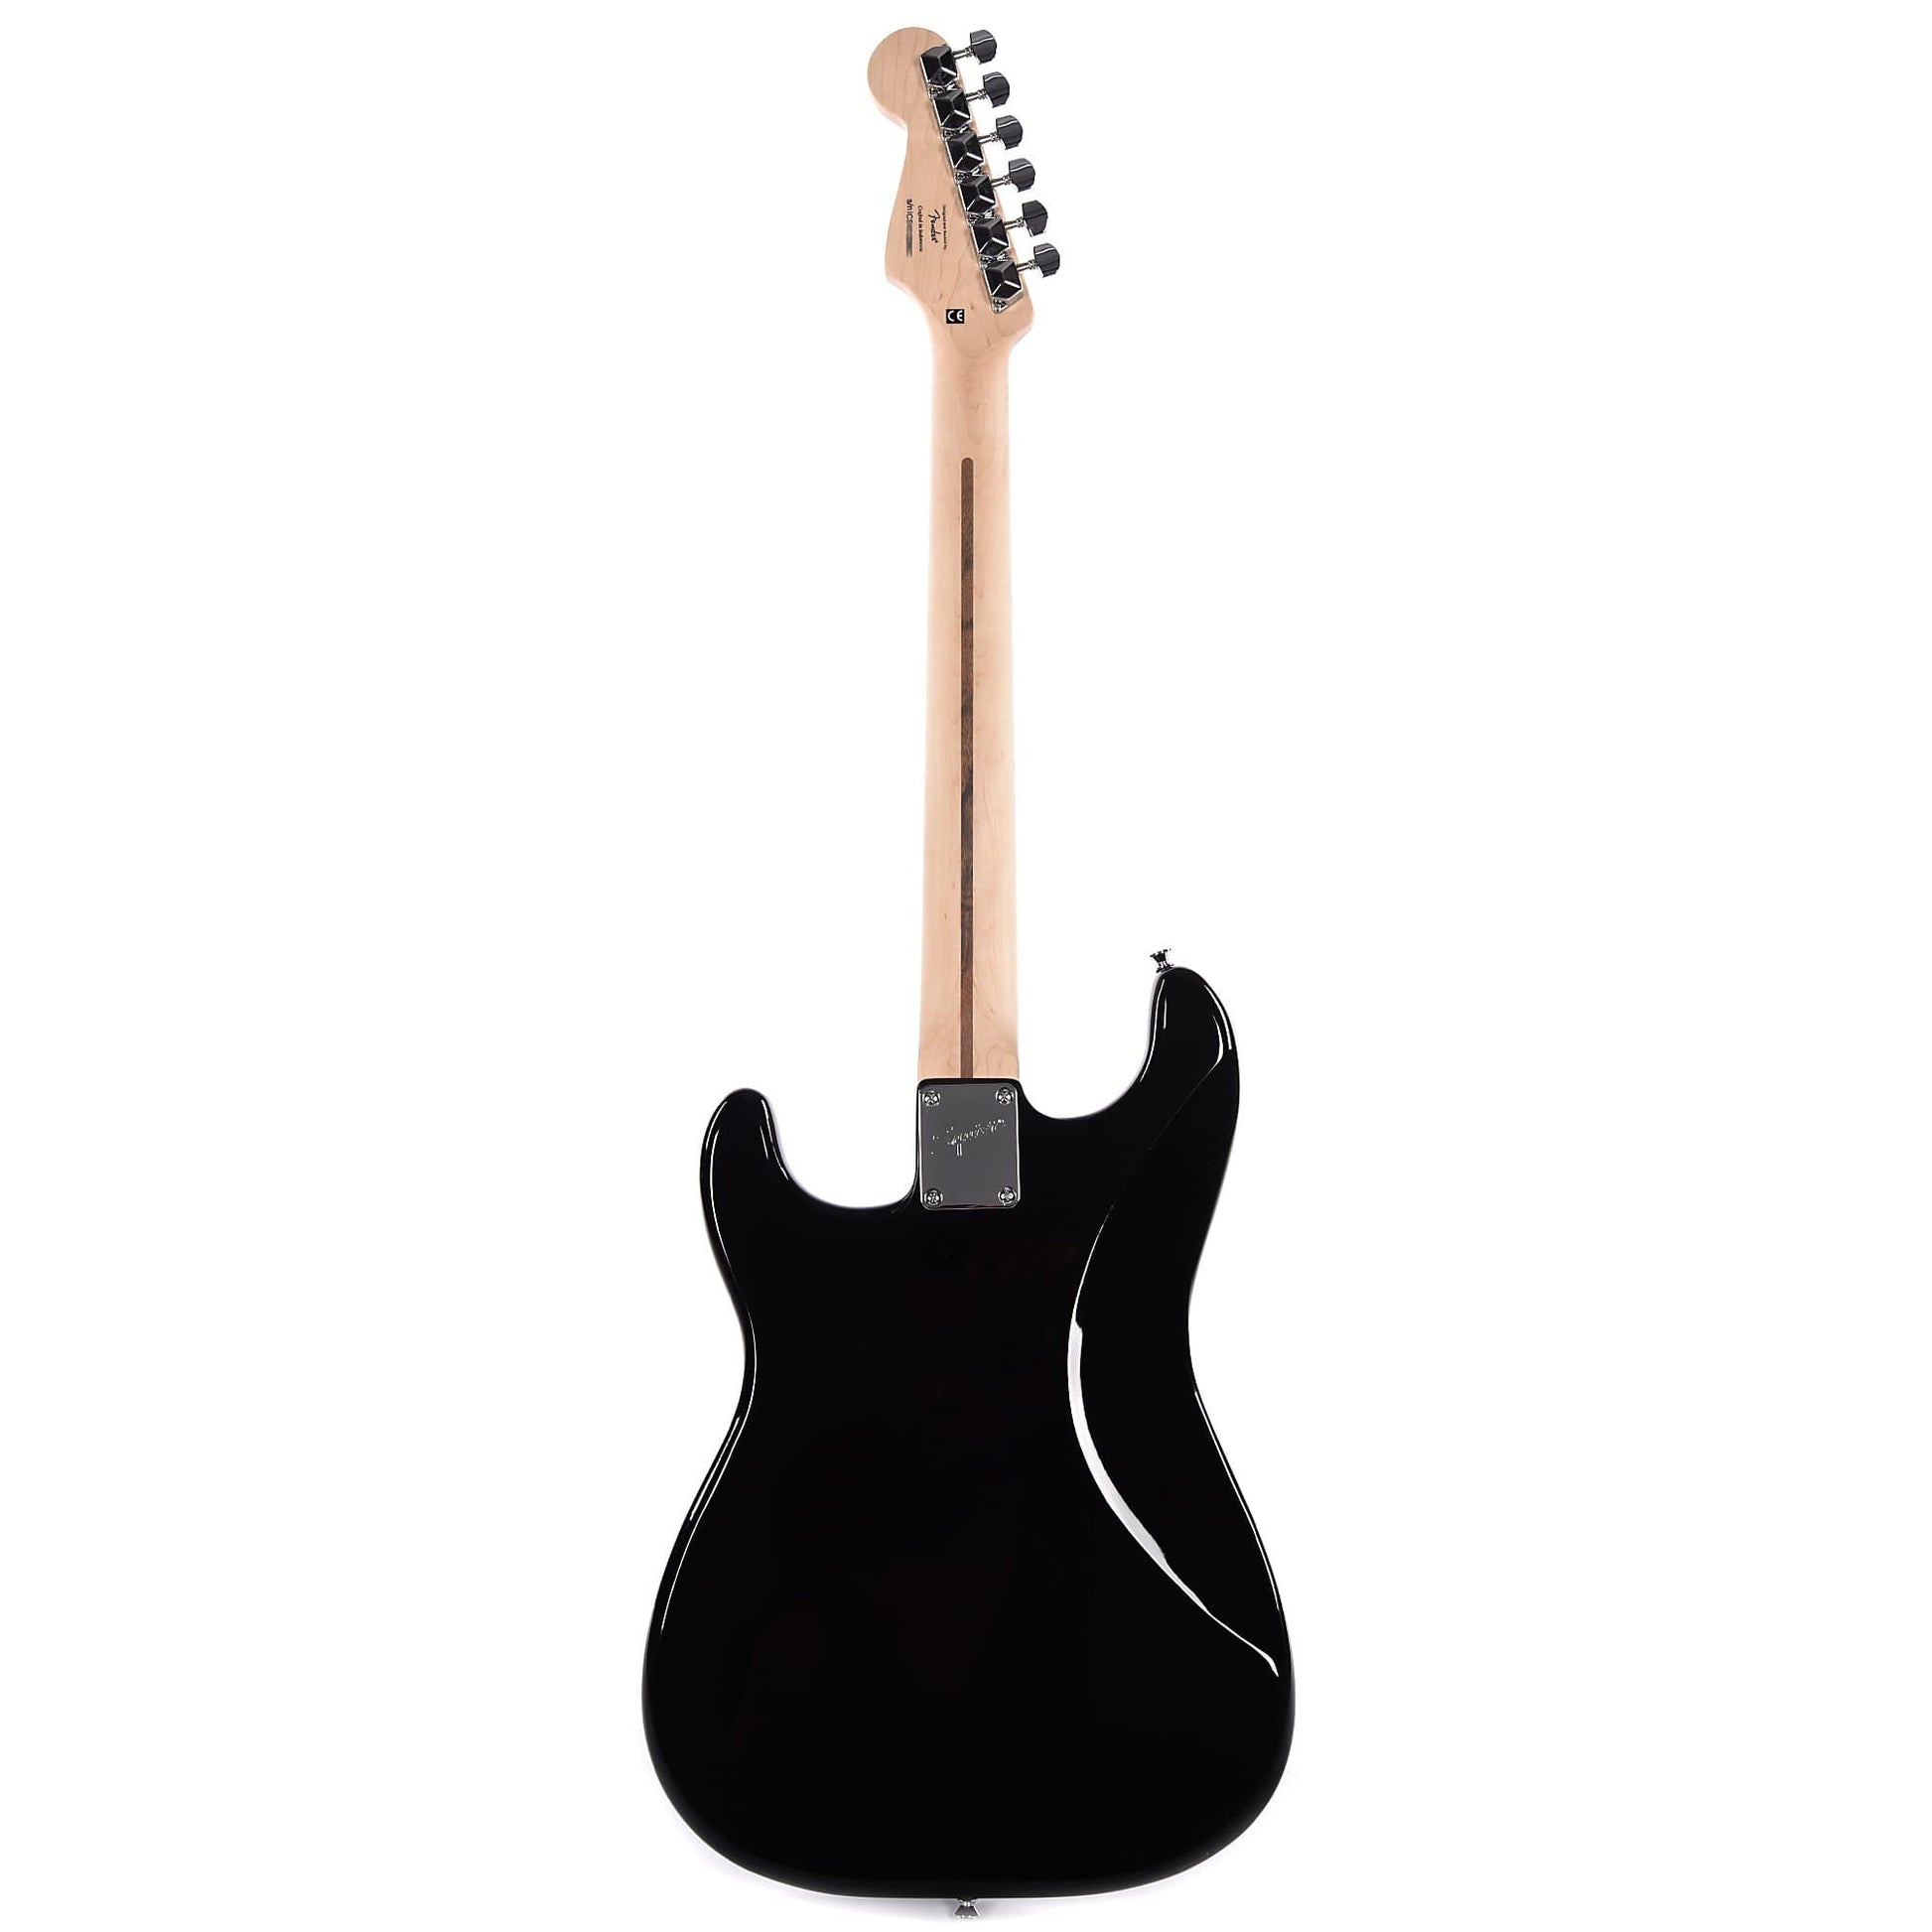 Squier Bullet Stratocaster Hard Tail Black Electric Guitars / Travel / Mini